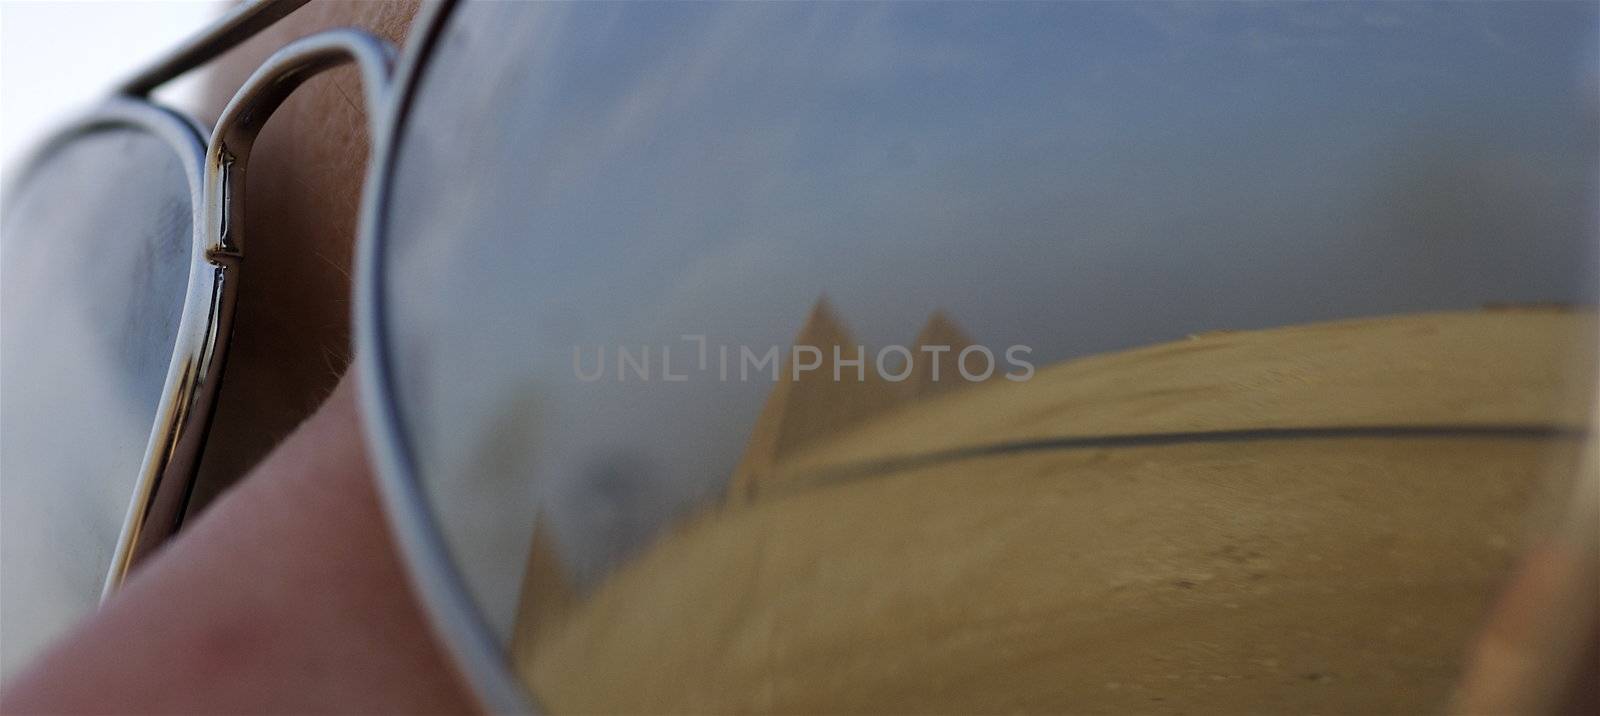 Reflection of all three Pyramids of Giza in sunglasses